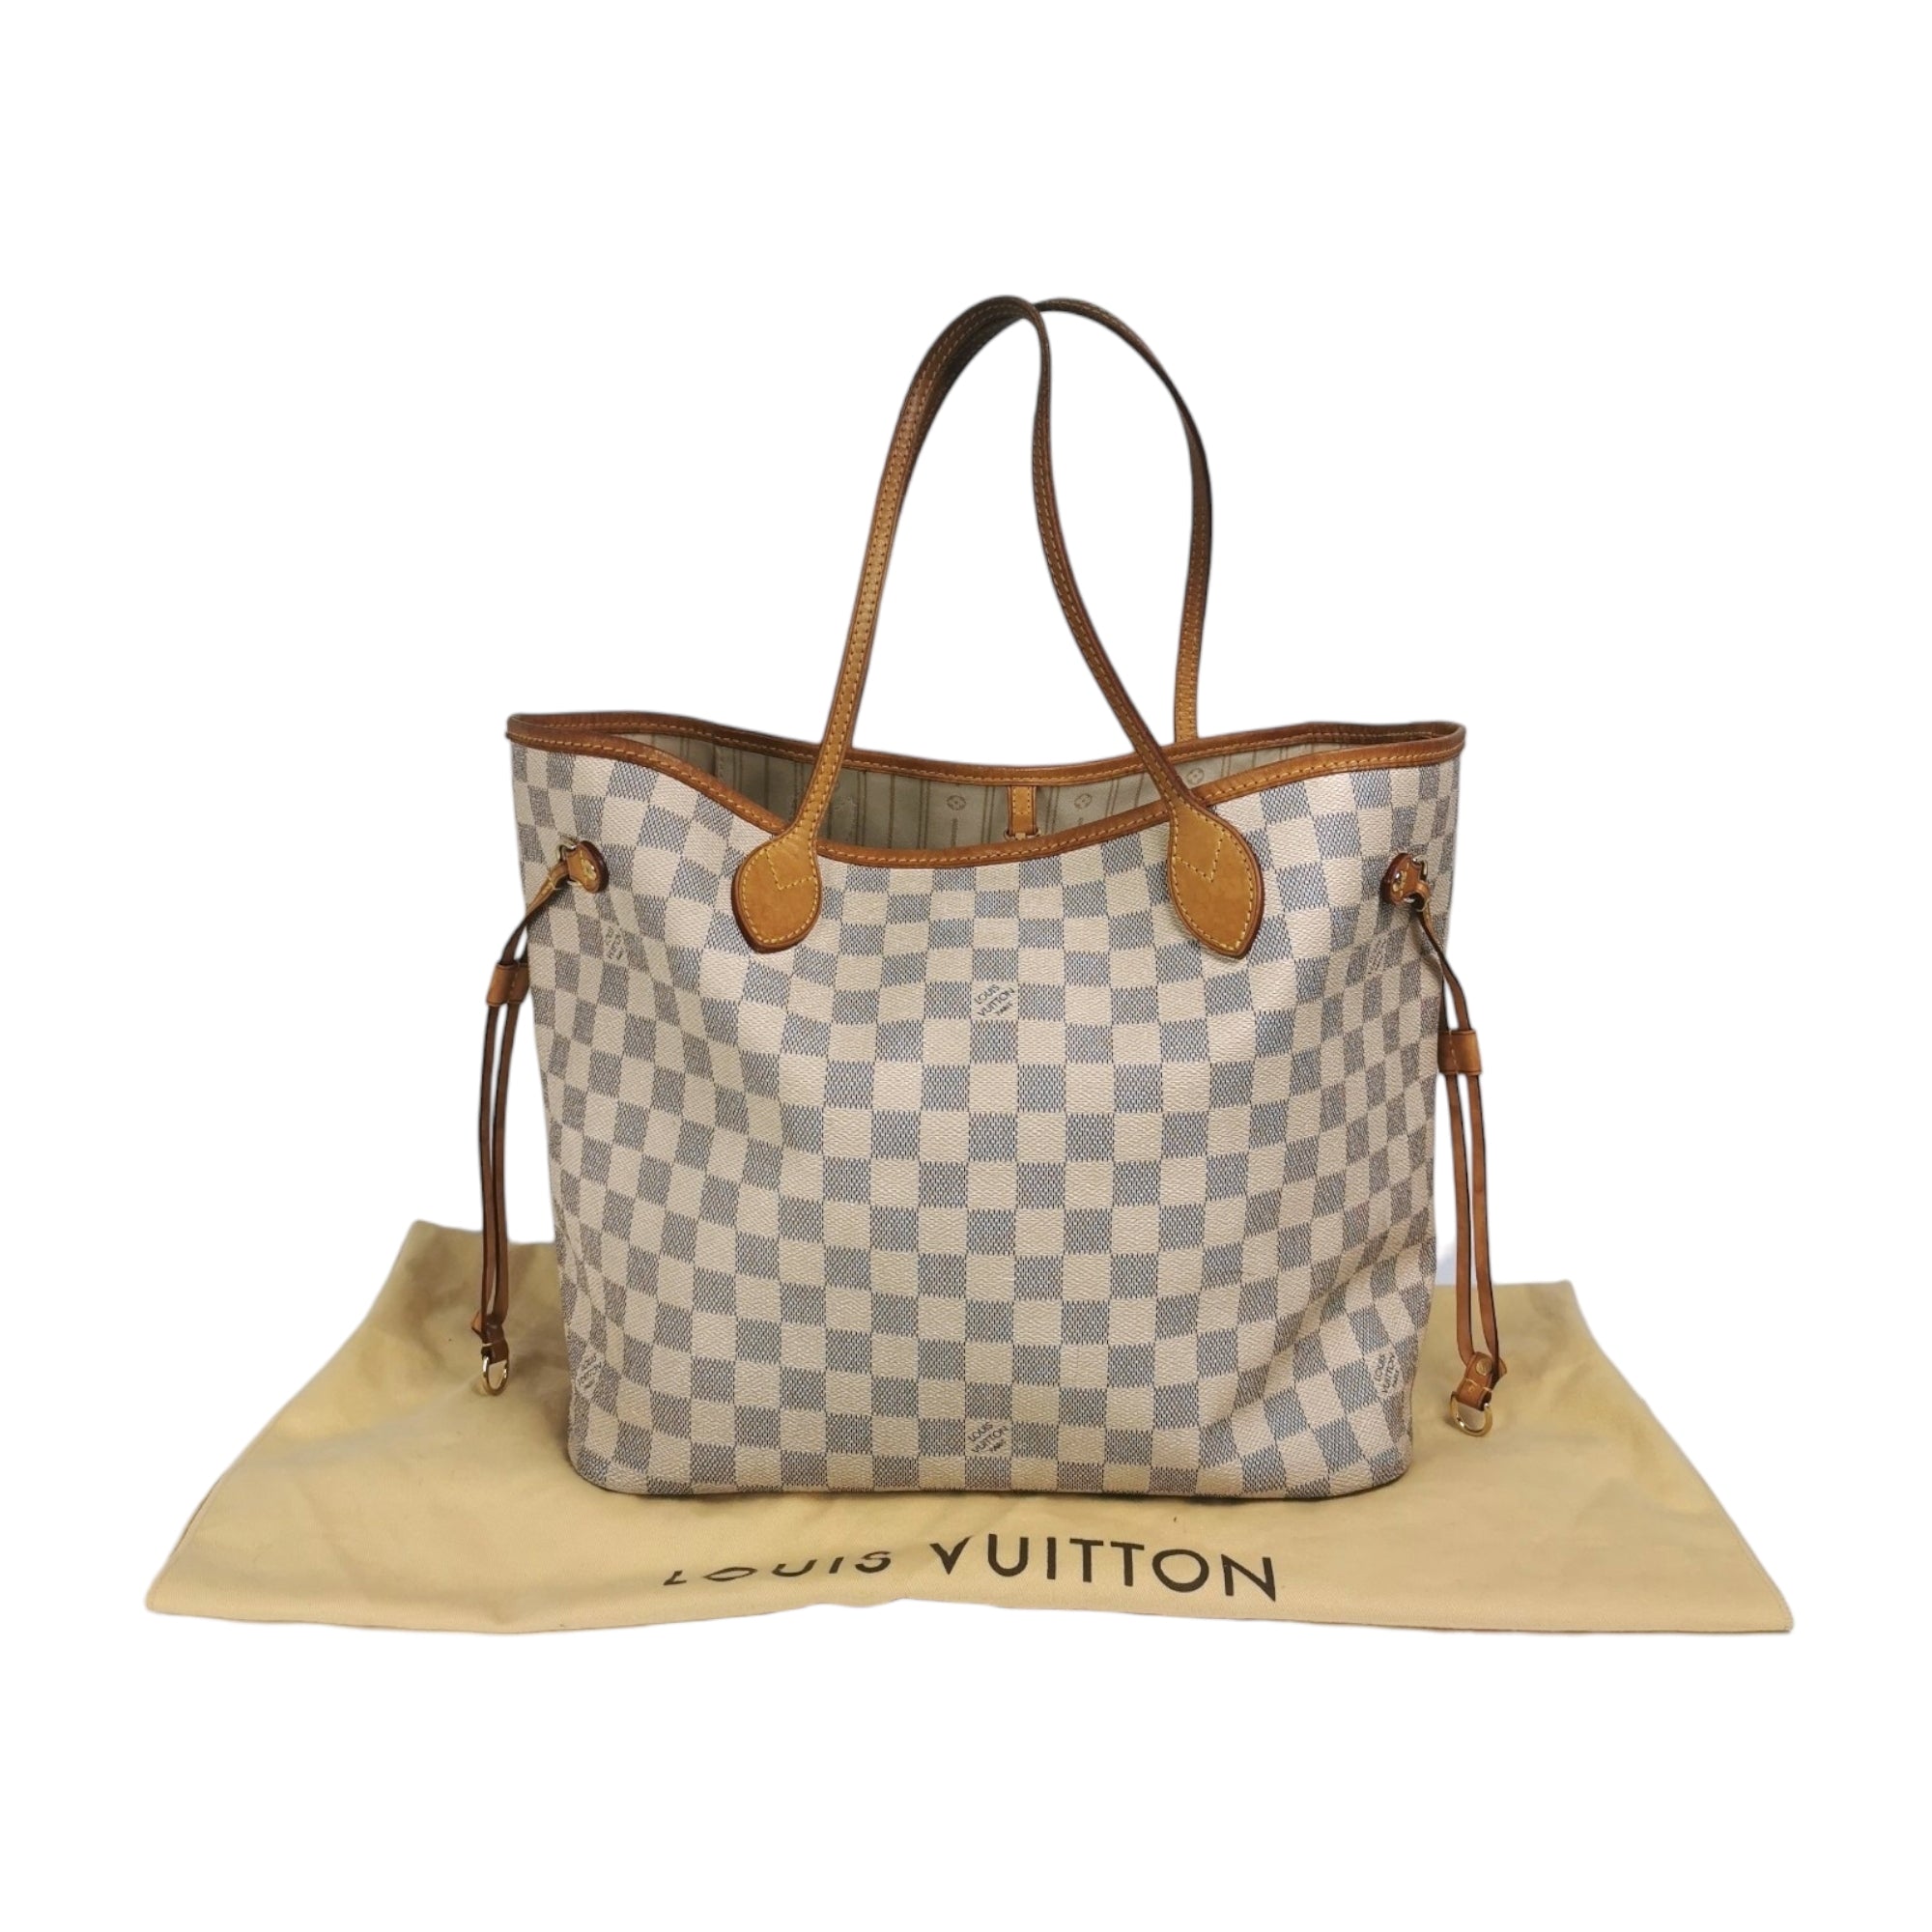 How To Clean Louis Vuitton Bag In 5 Minutes! (NEVERFULL HANDBAG) 